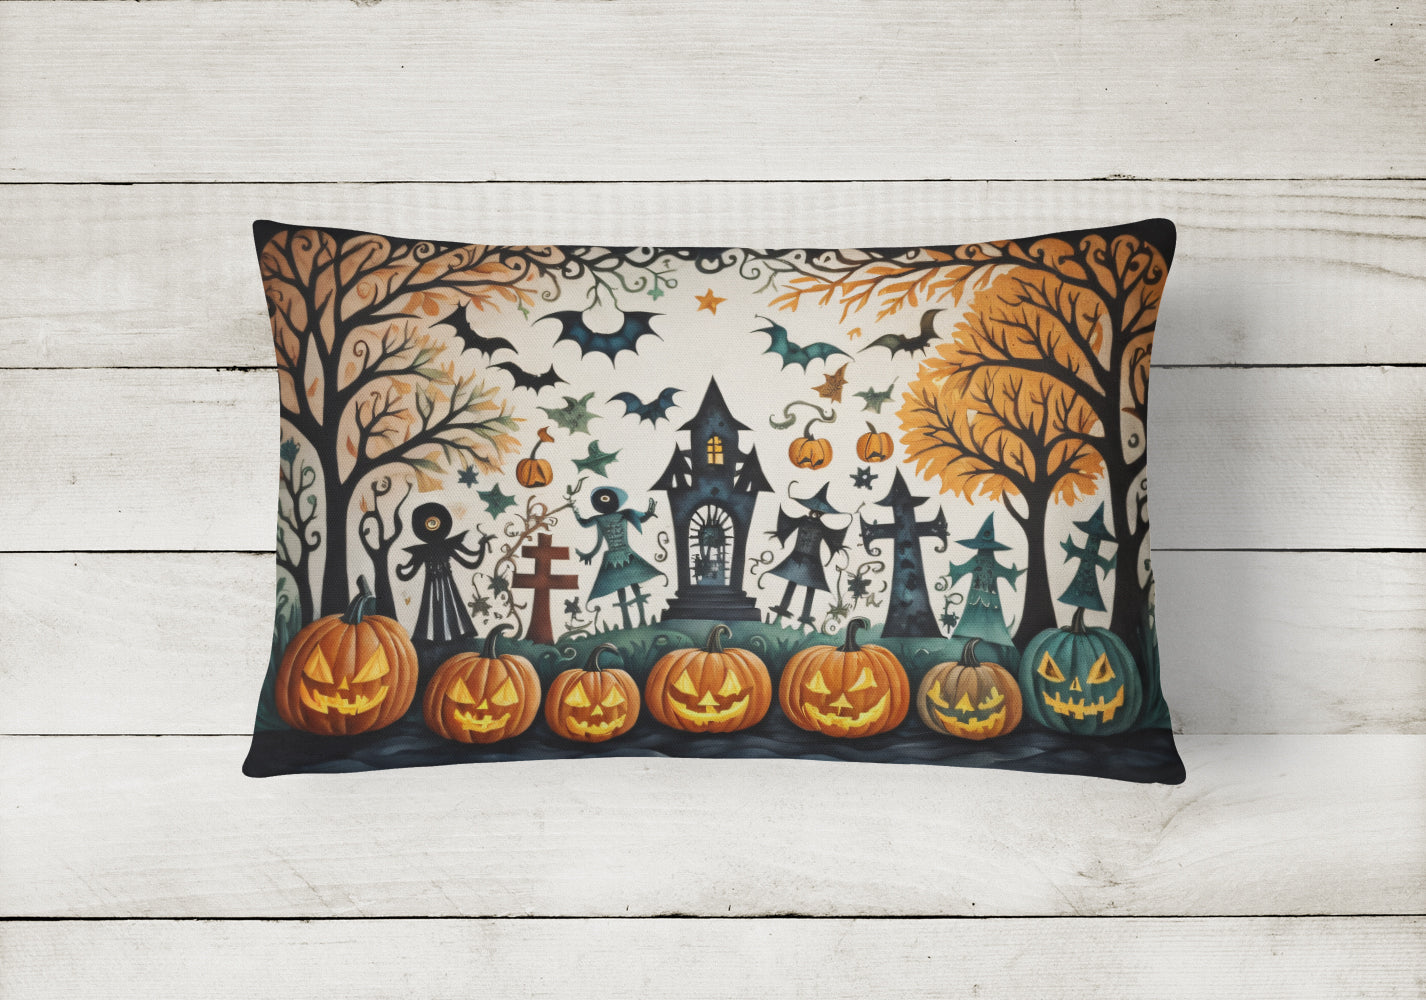 Buy this Papel Picado Skeletons Spooky Halloween Fabric Decorative Pillow